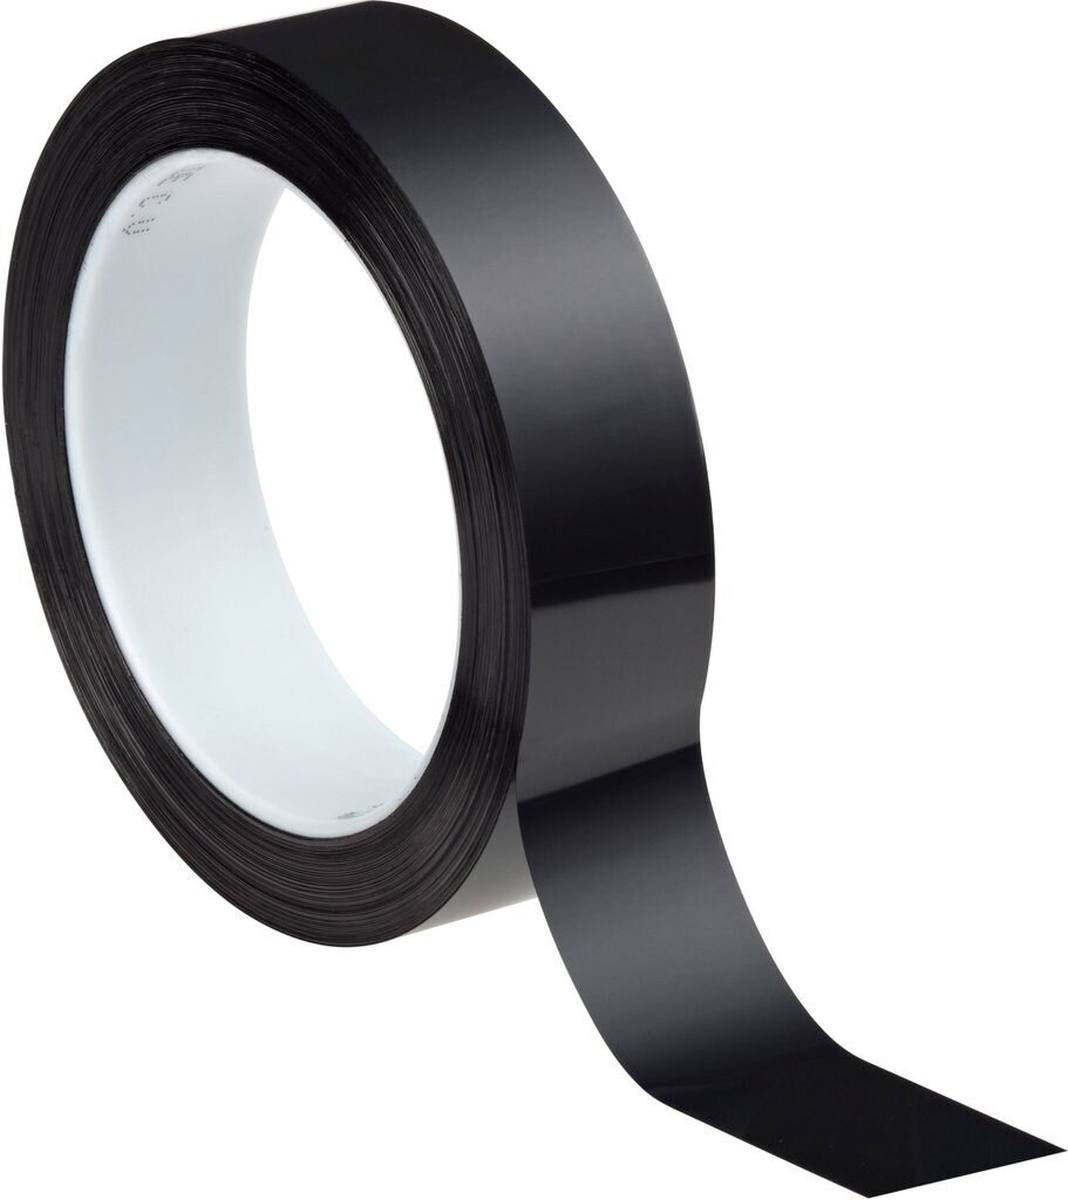 3M polyester adhesive tape 850 T, transparent, 50.8 mm x 66 m, 0.05 mm